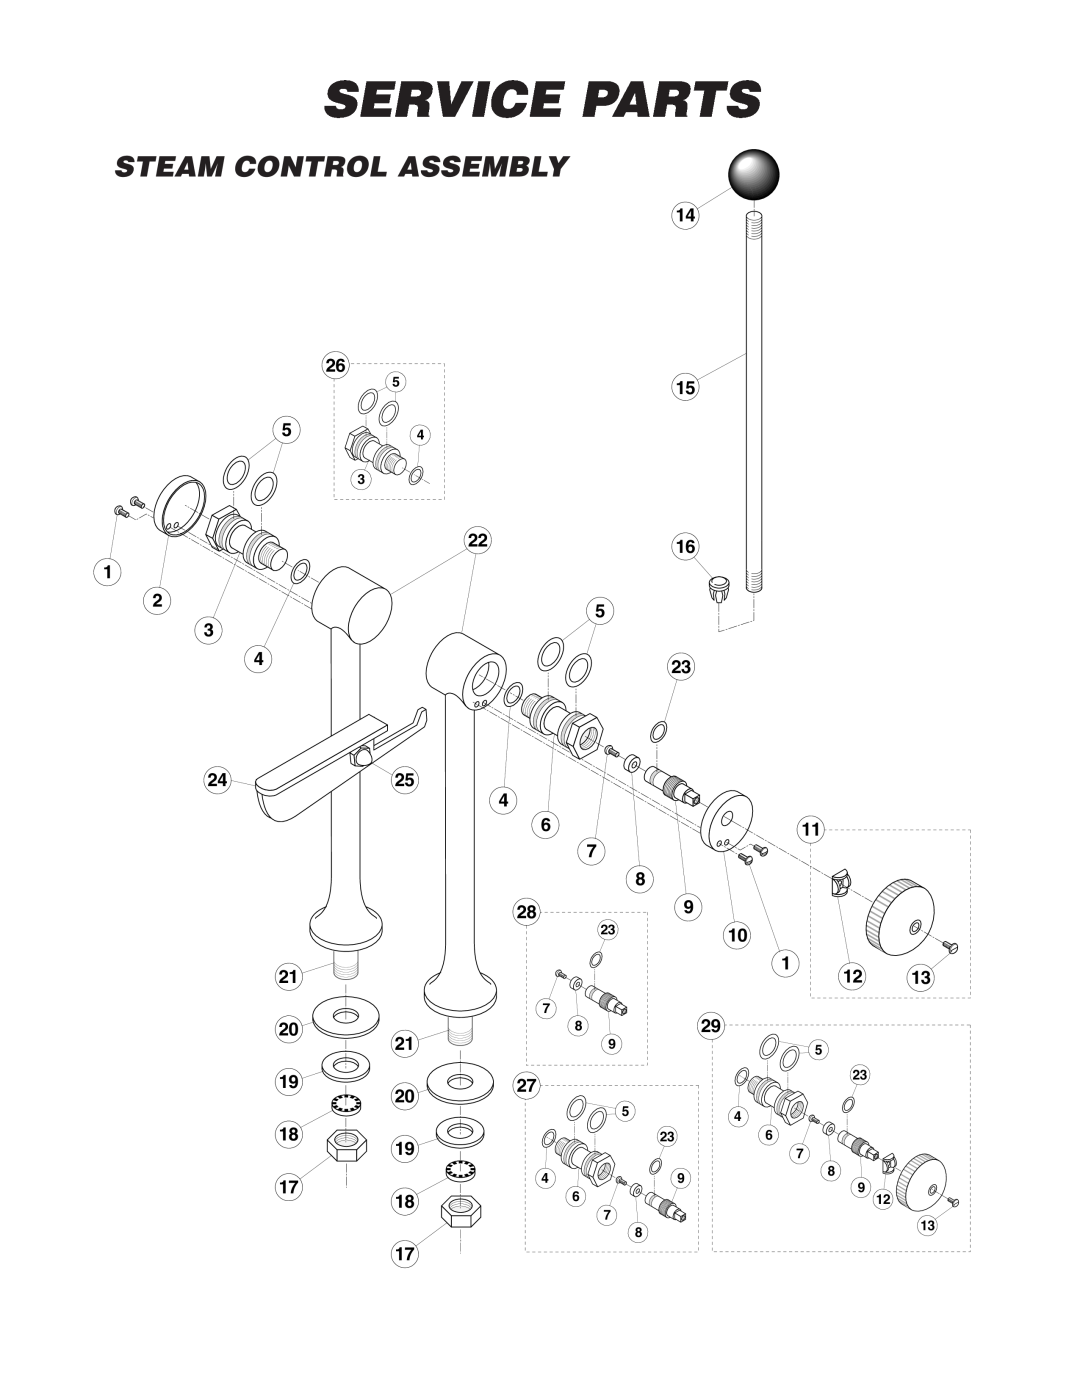 Cleveland Range SD-1600-K 620, SD-1200-K 612, SD-760- K20, SD-1600-K1212, SD-1600-K2020 Service Parts, Steam Control Assembly 